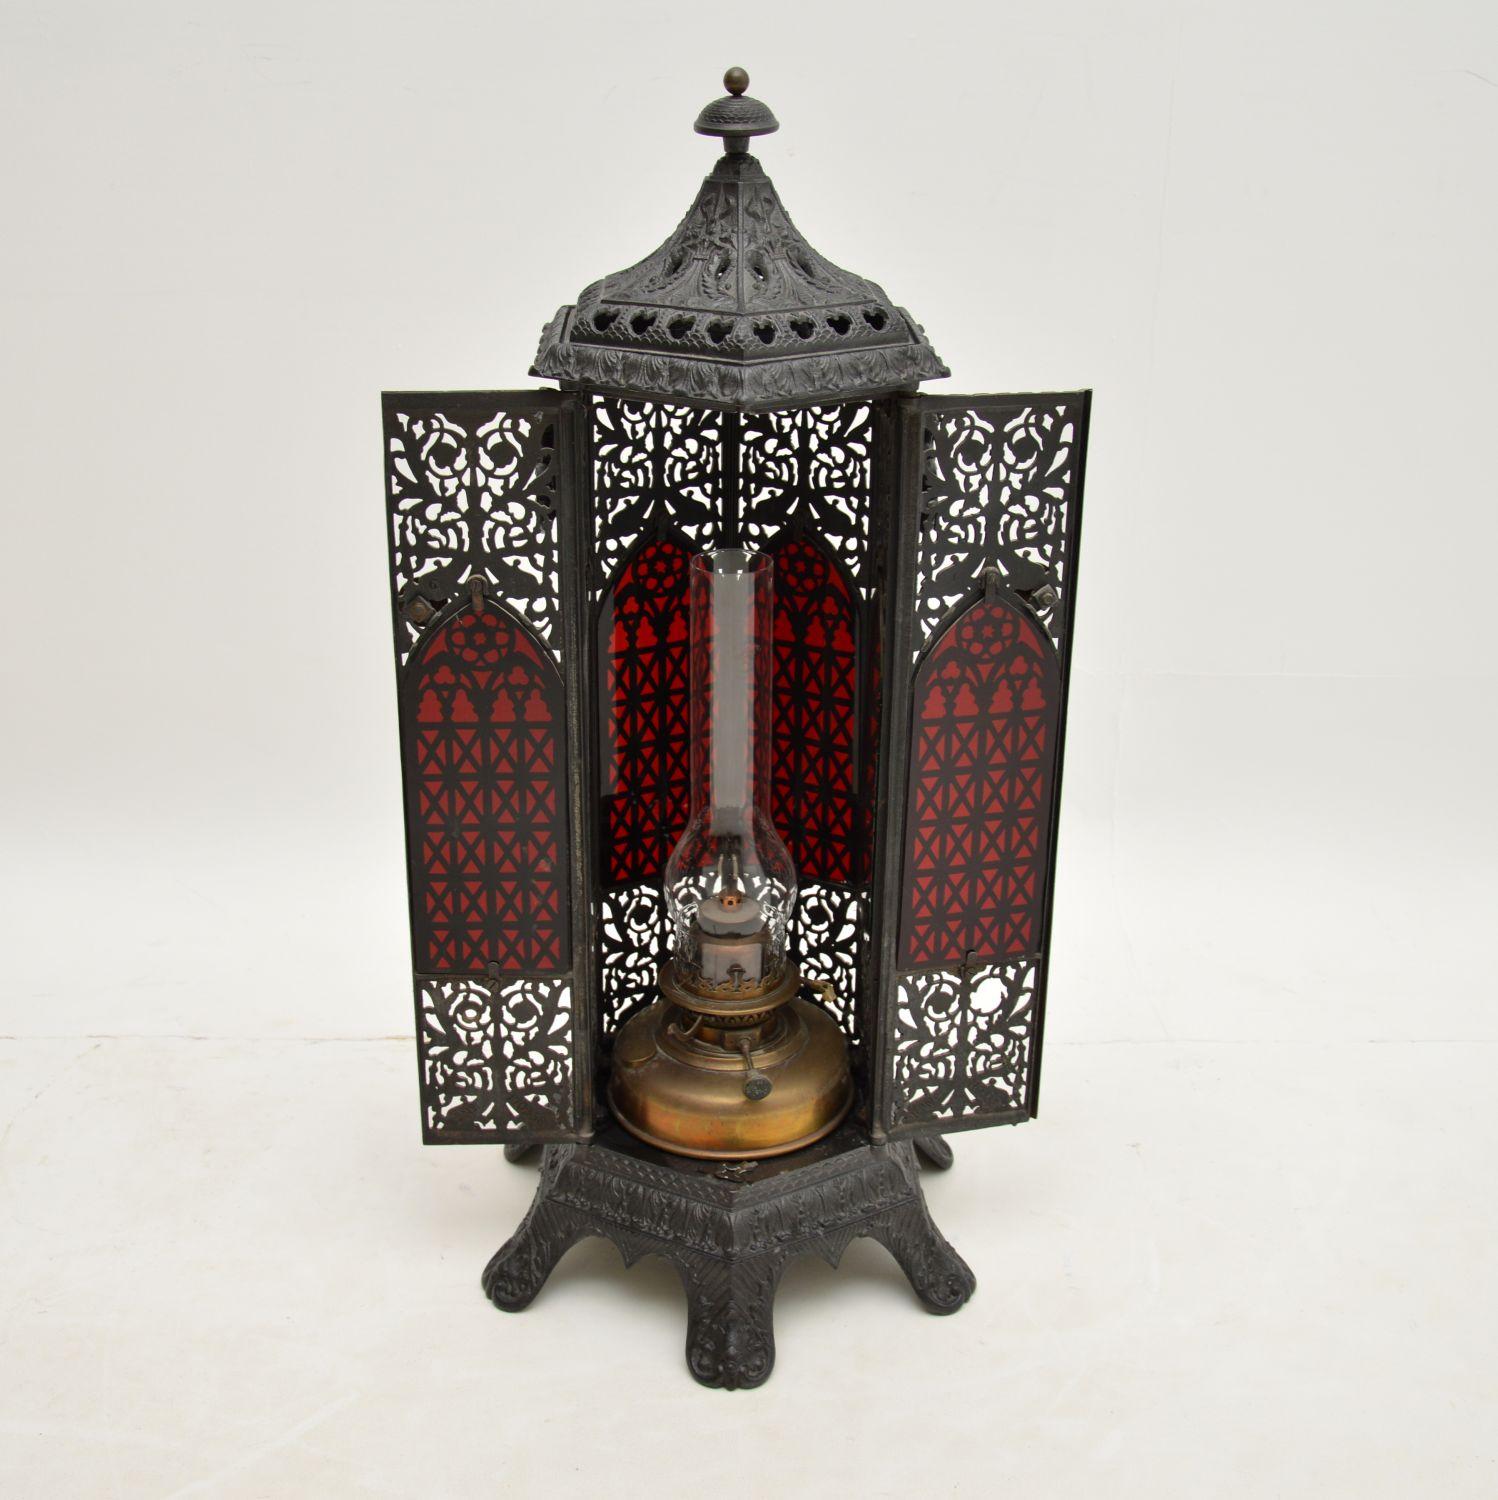 A beautiful antique gas heater made from intricate cast Iron. This was made in England, it dates from around the 1890-1910 period.

The quality is amazing, this is beautifully designed and looks great from all angles.

The condition seems to be